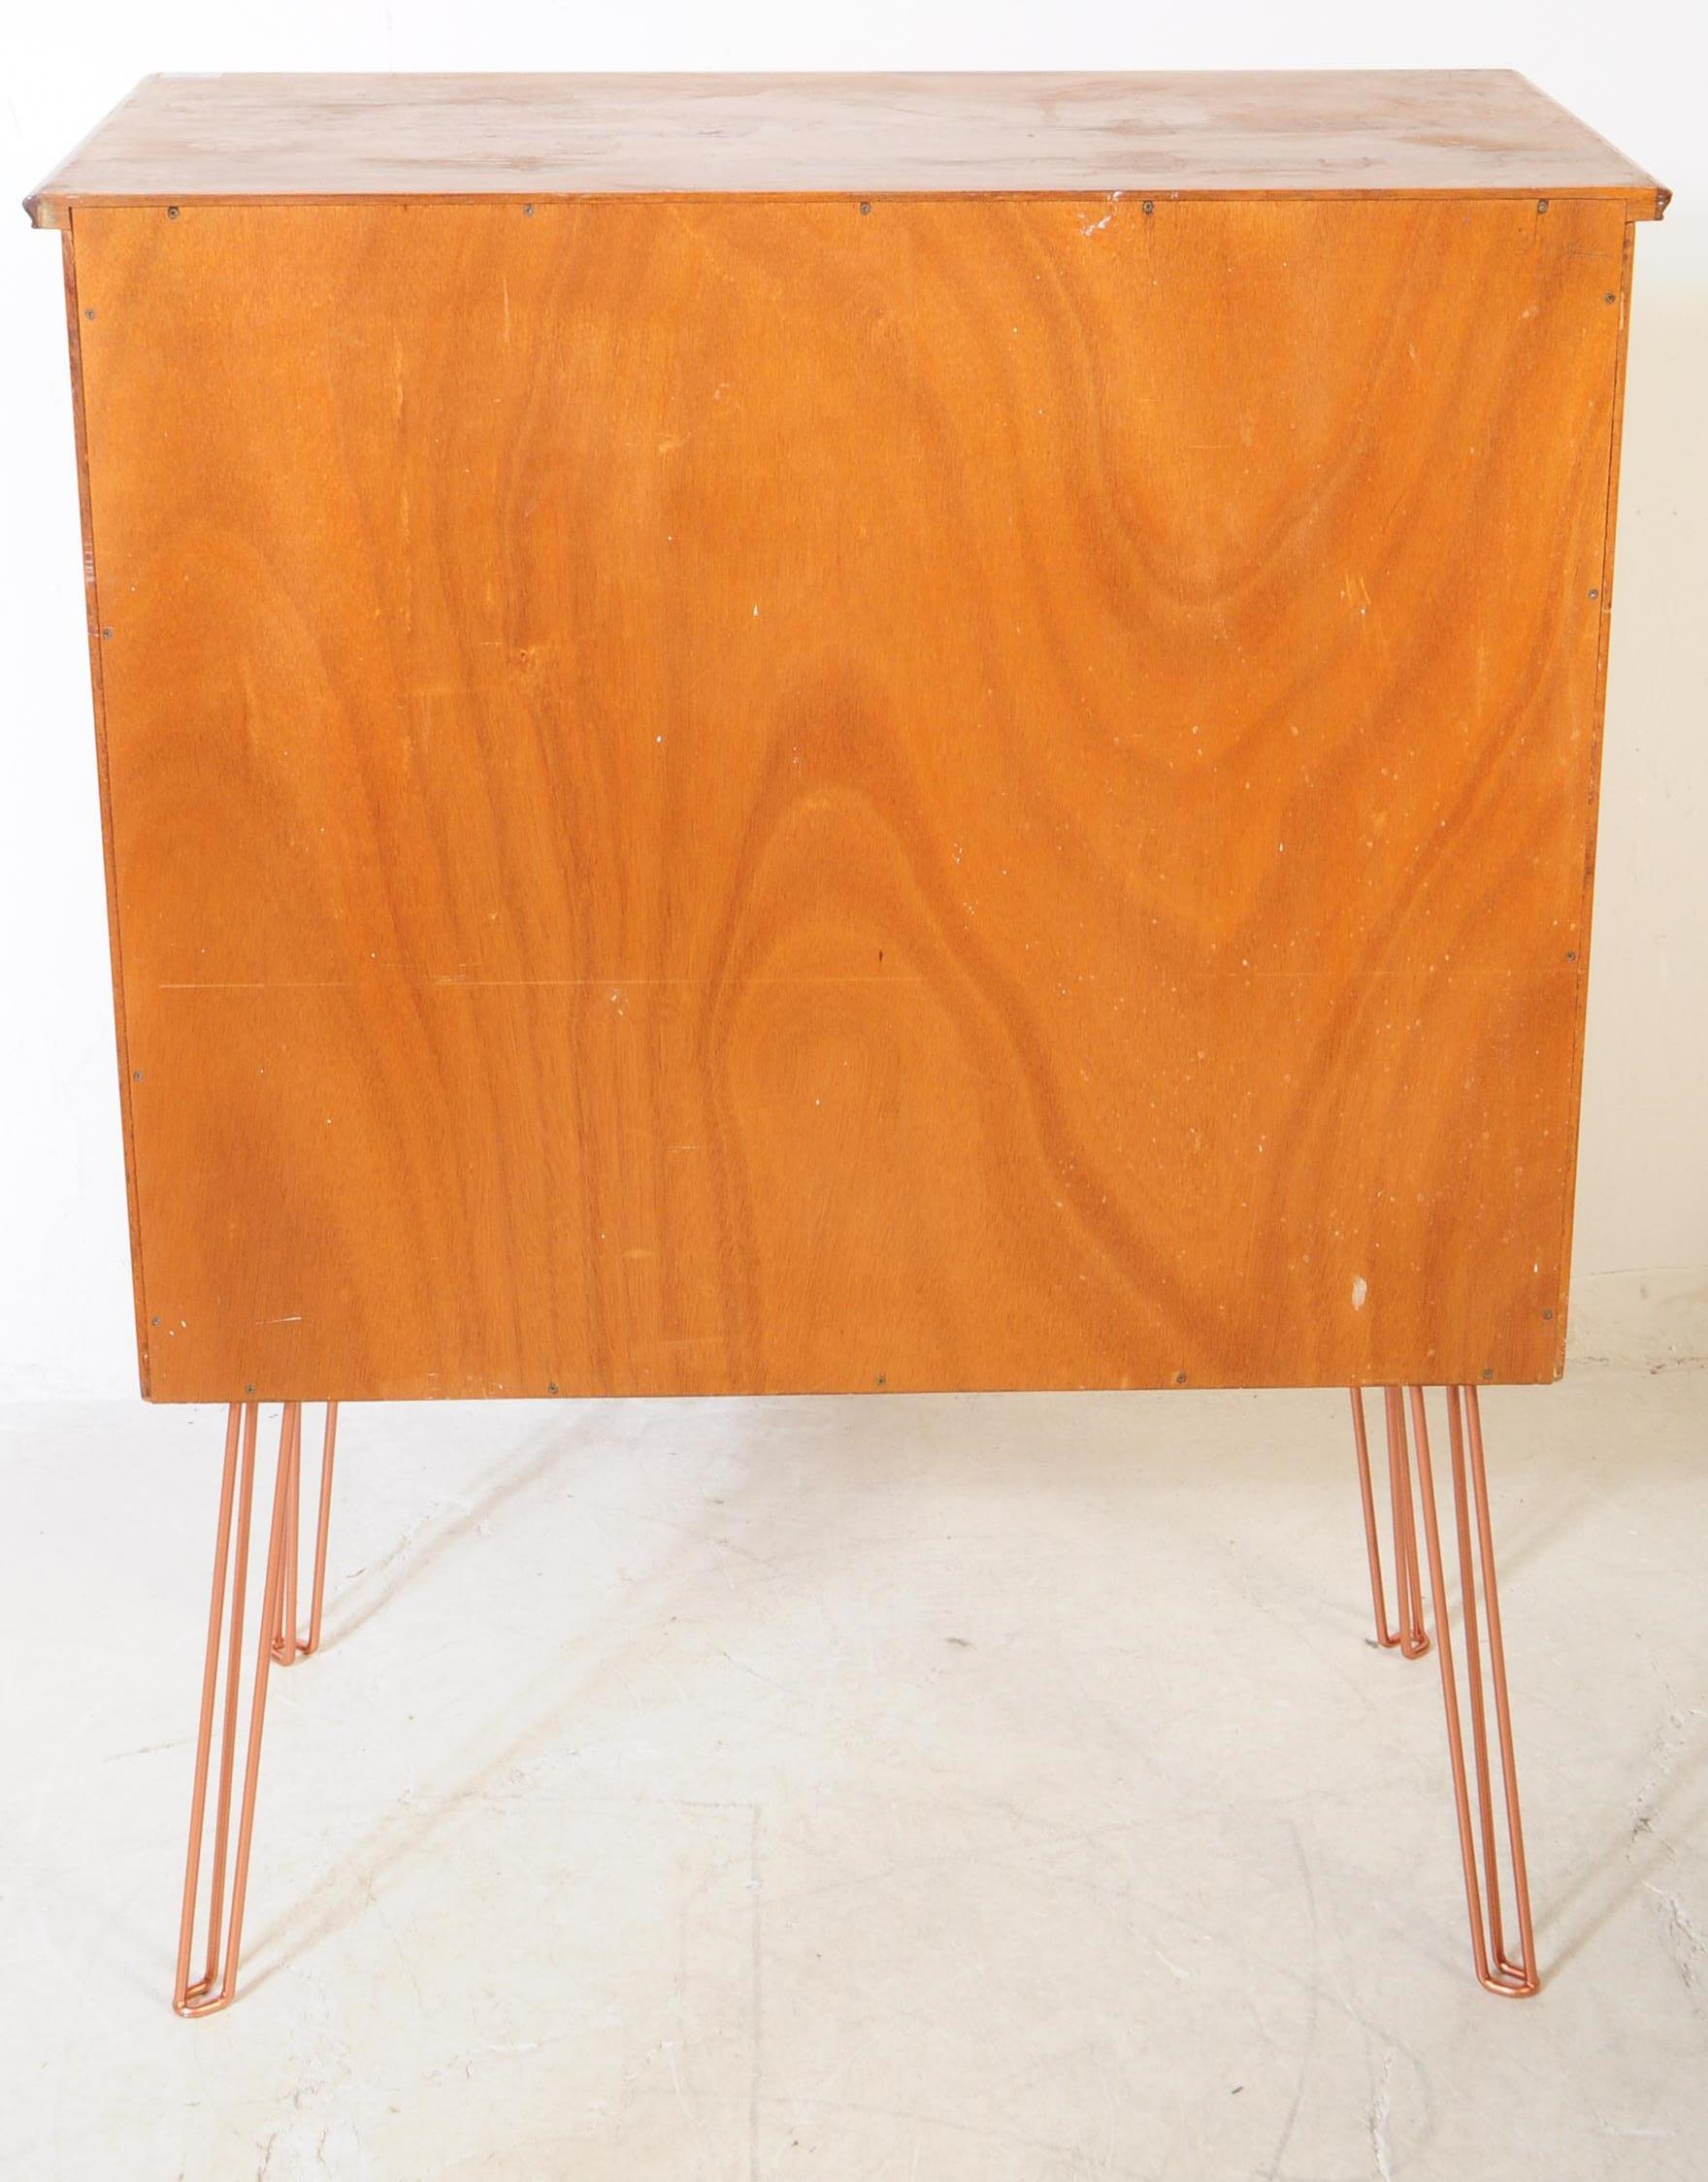 ALFRED COX - VINTAGE MID CENTURY TEAK CHEST OF DRAWERS - Image 5 of 5